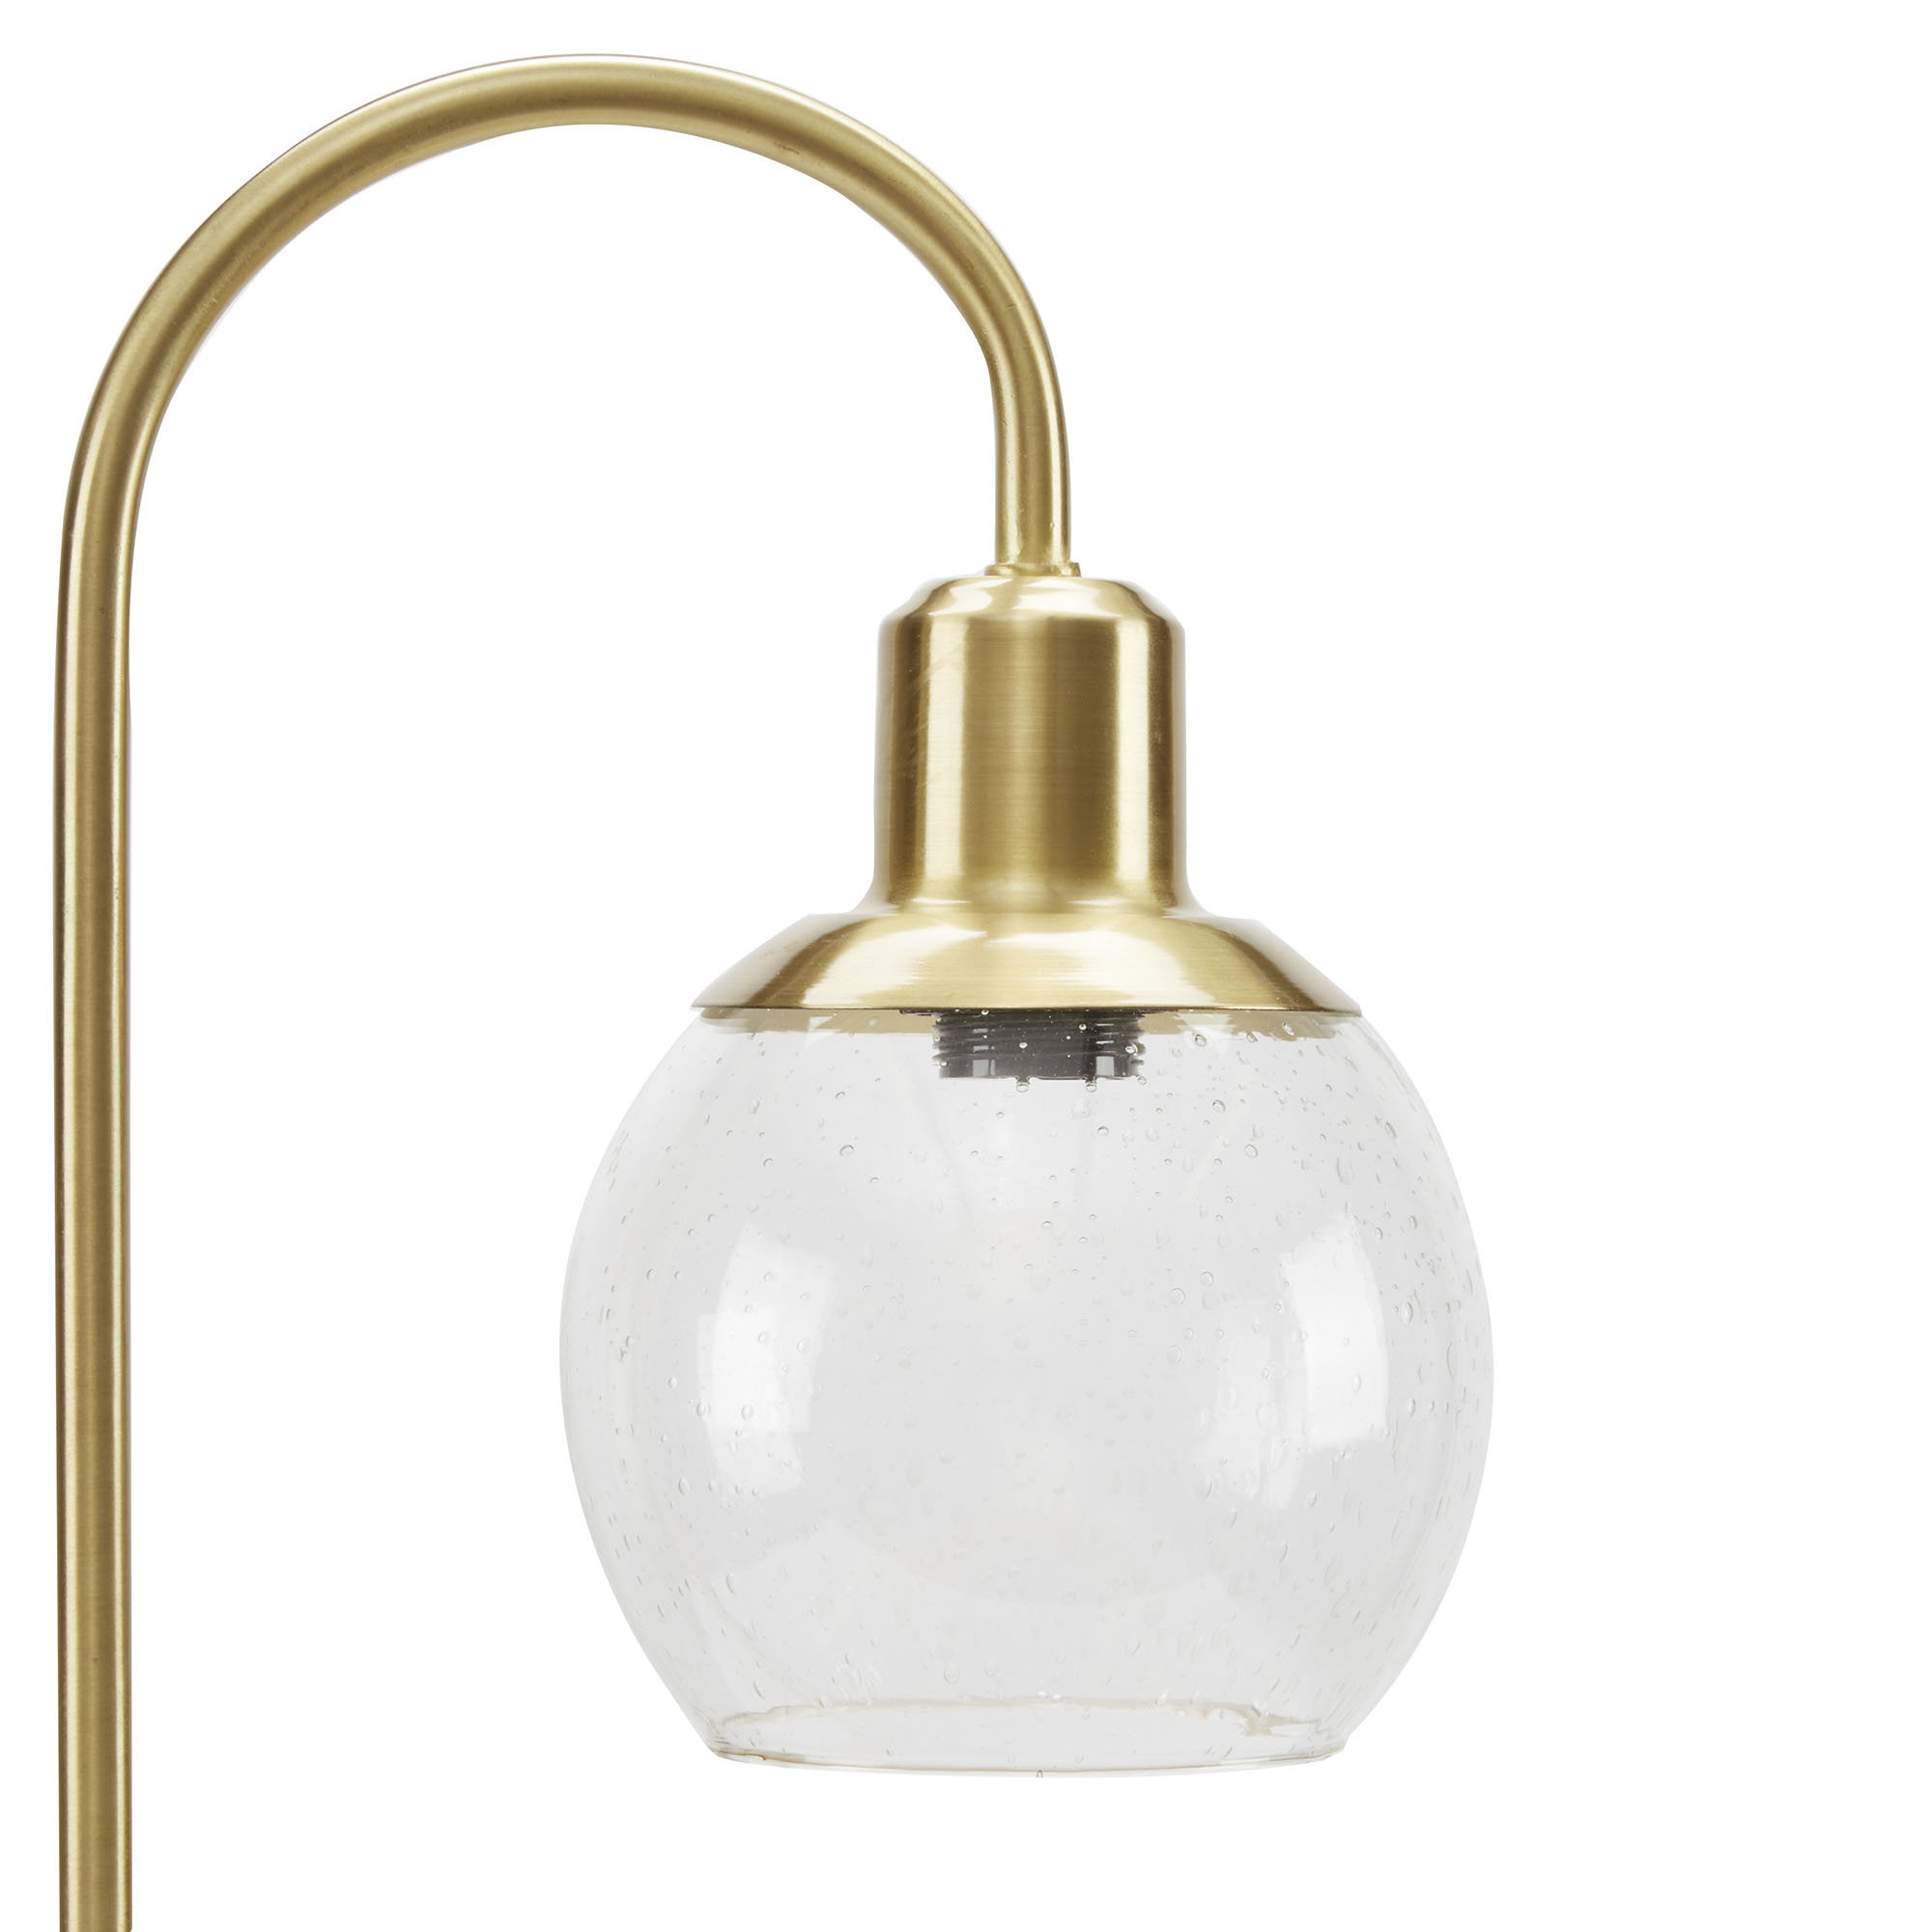 Better Homes & Gardens Real Marble Table Lamp, Brushed Brass Finish - image 2 of 5